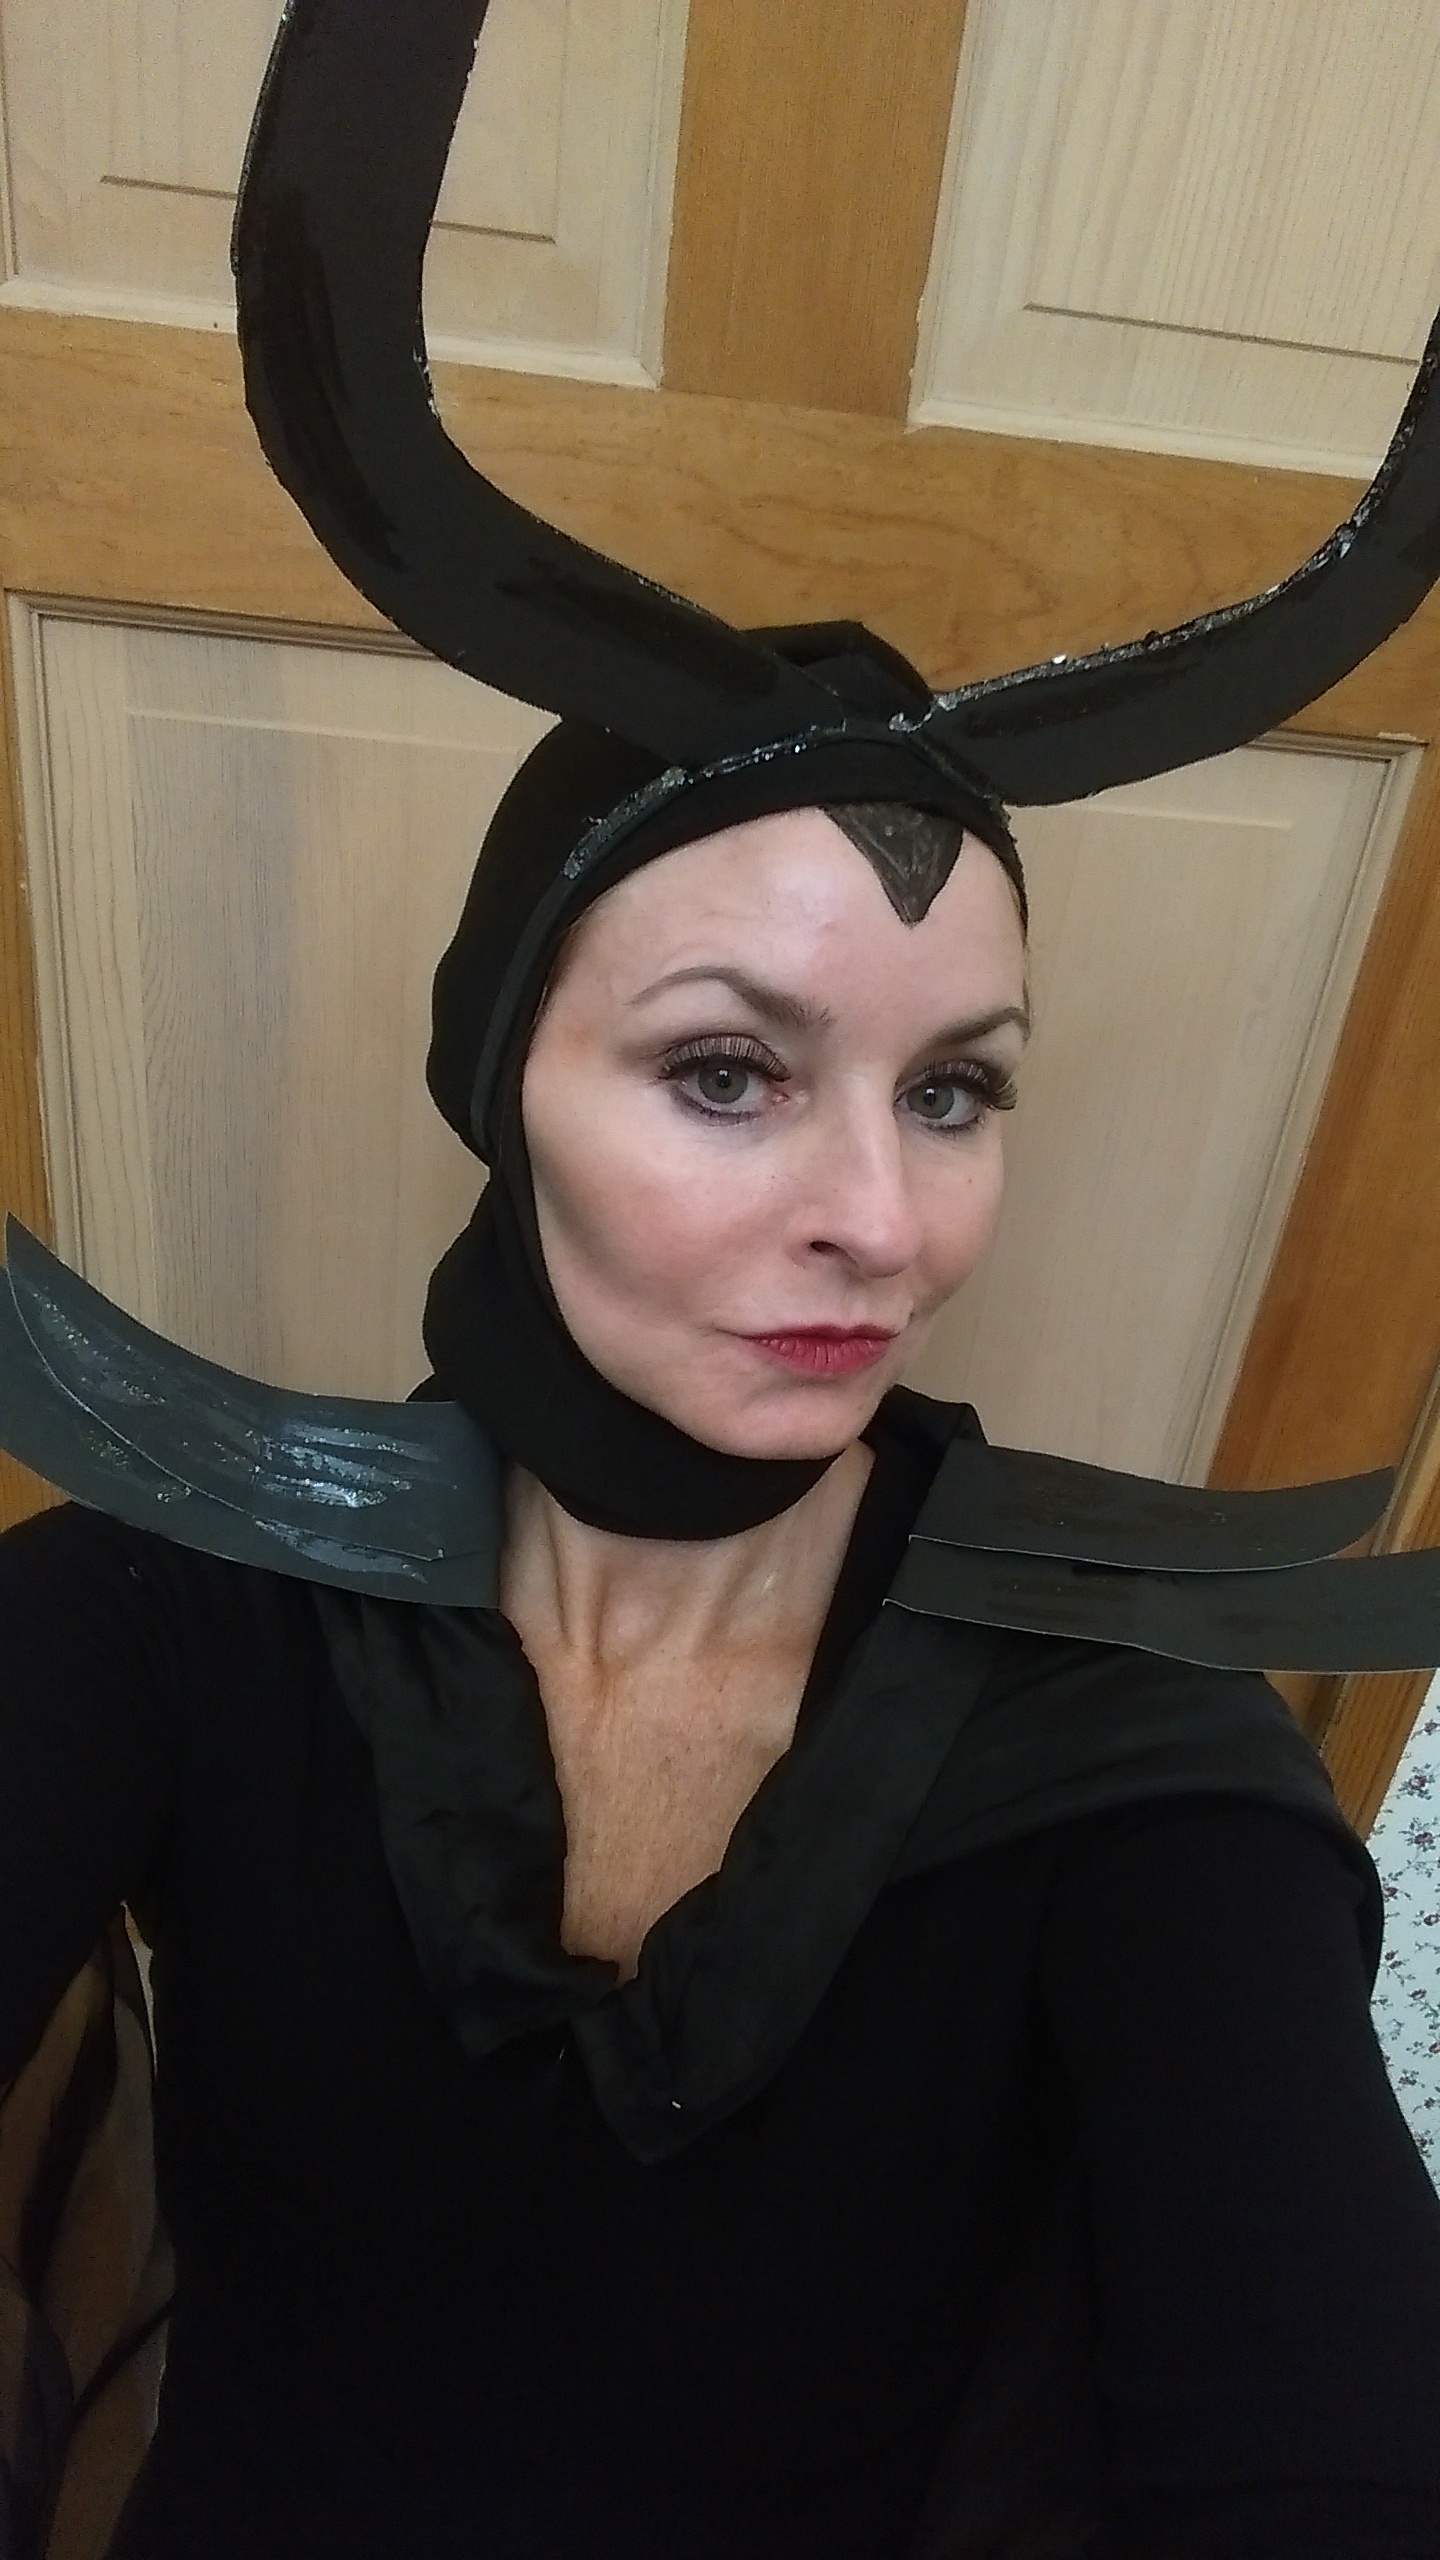 Maleficent is in town!!!